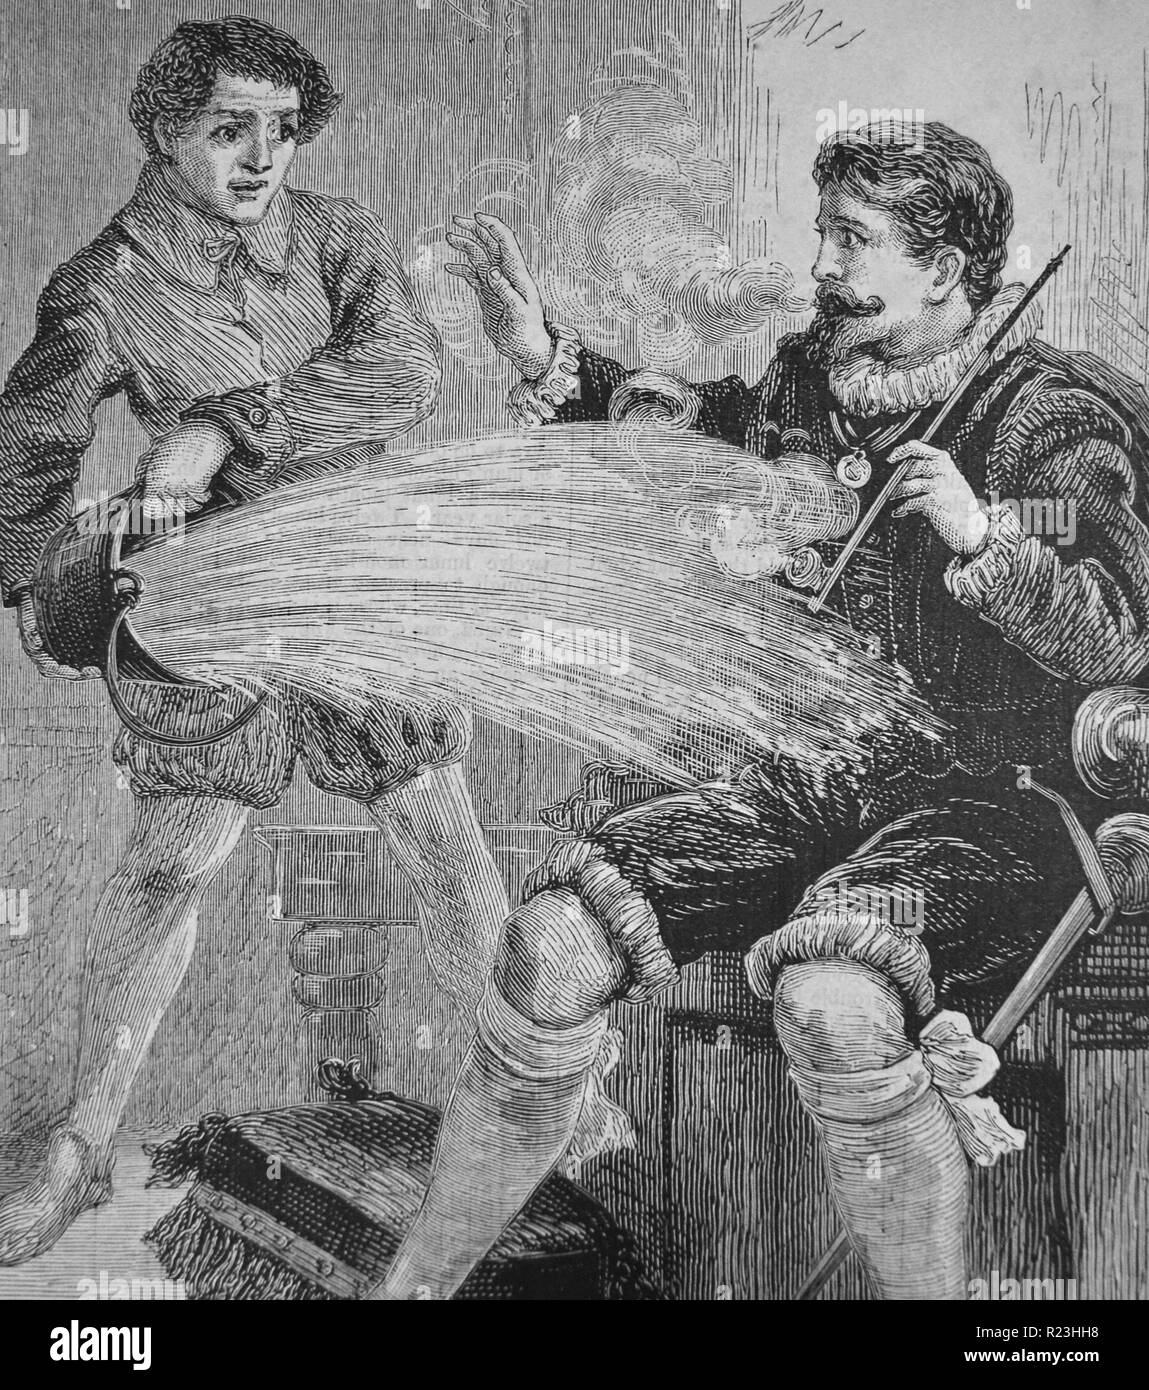 The legend that Walter Raleigh (1552-1618) English courtier and navigator, was soaked with a bucket of water by his servant who thought his master was on fire when smoking a pipe. Lllustration, London, 1877. Stock Photo